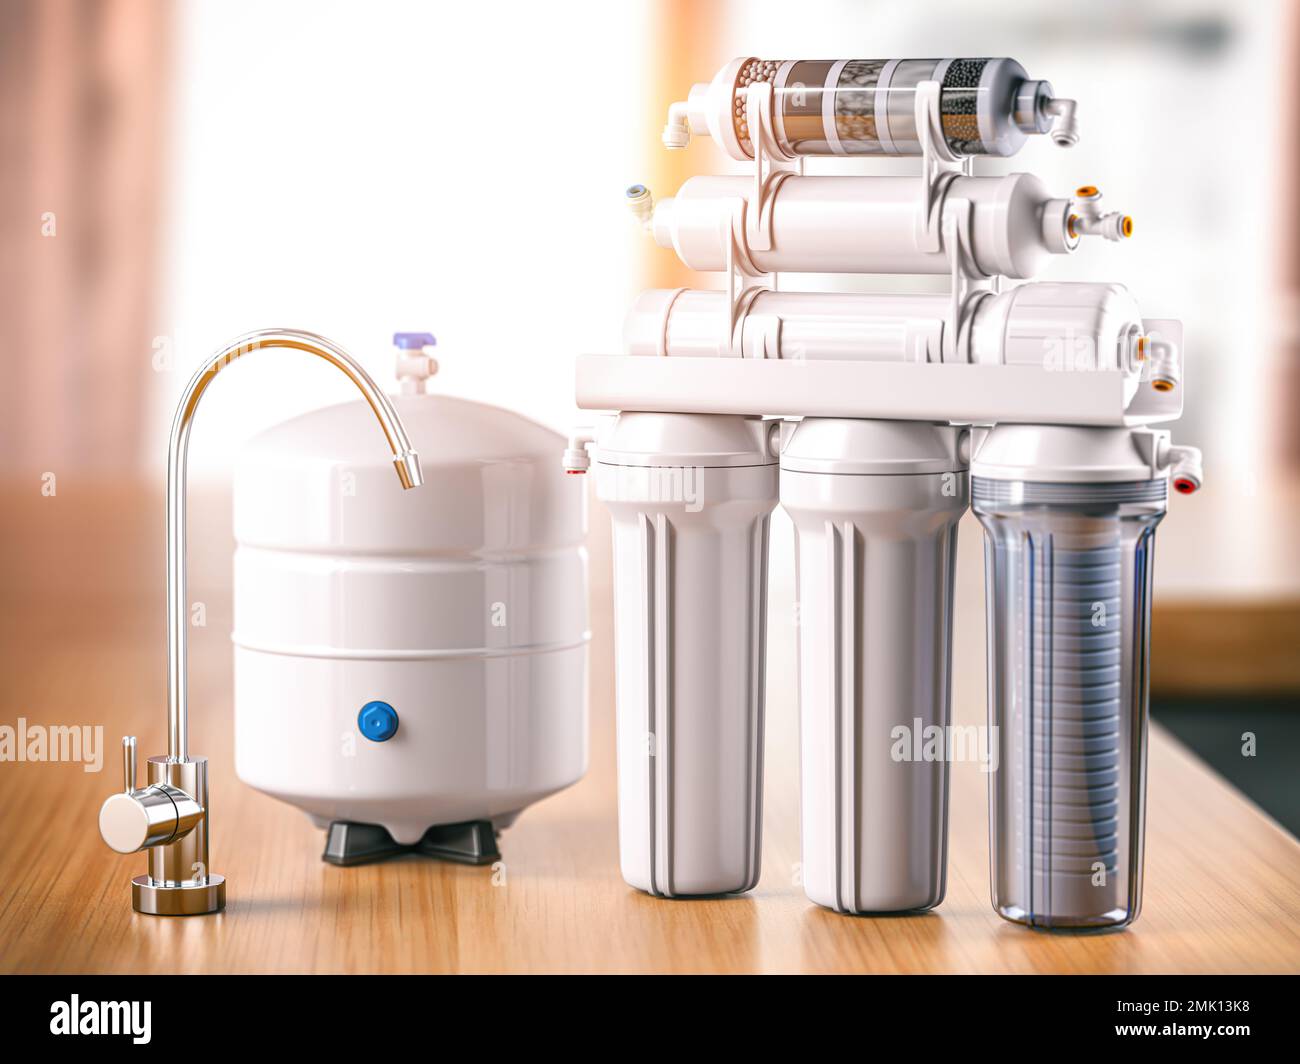 Reverse osmosis water purification system on a table. Water cleaning system. 3d illustration Stock Photo